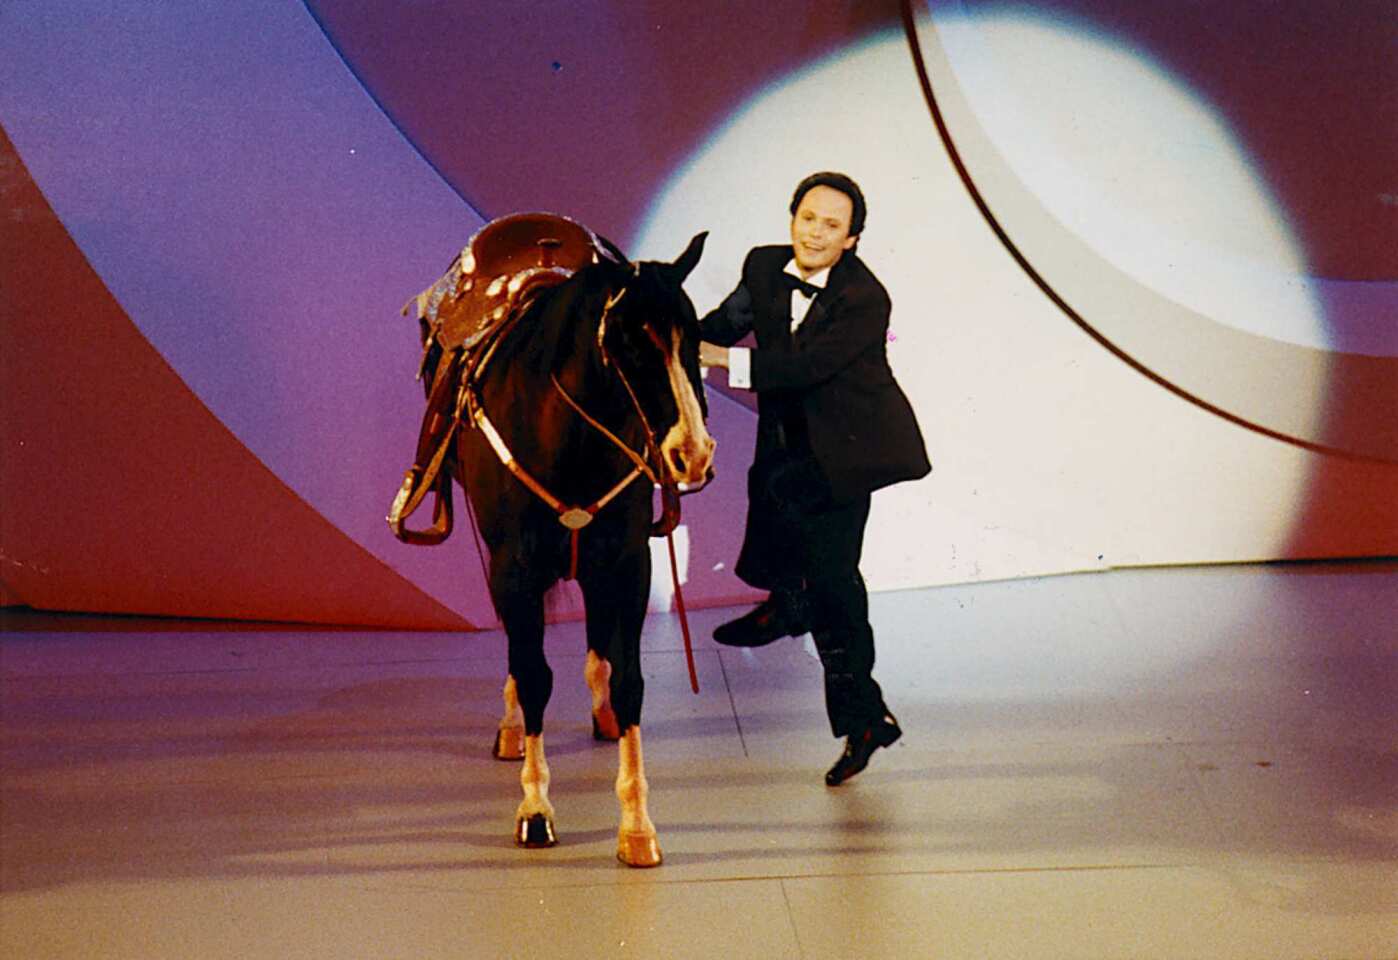 The comedian did a "Dances With Wolves" skit for the 1991 Academy Awards telecast, hoofing with a horse.